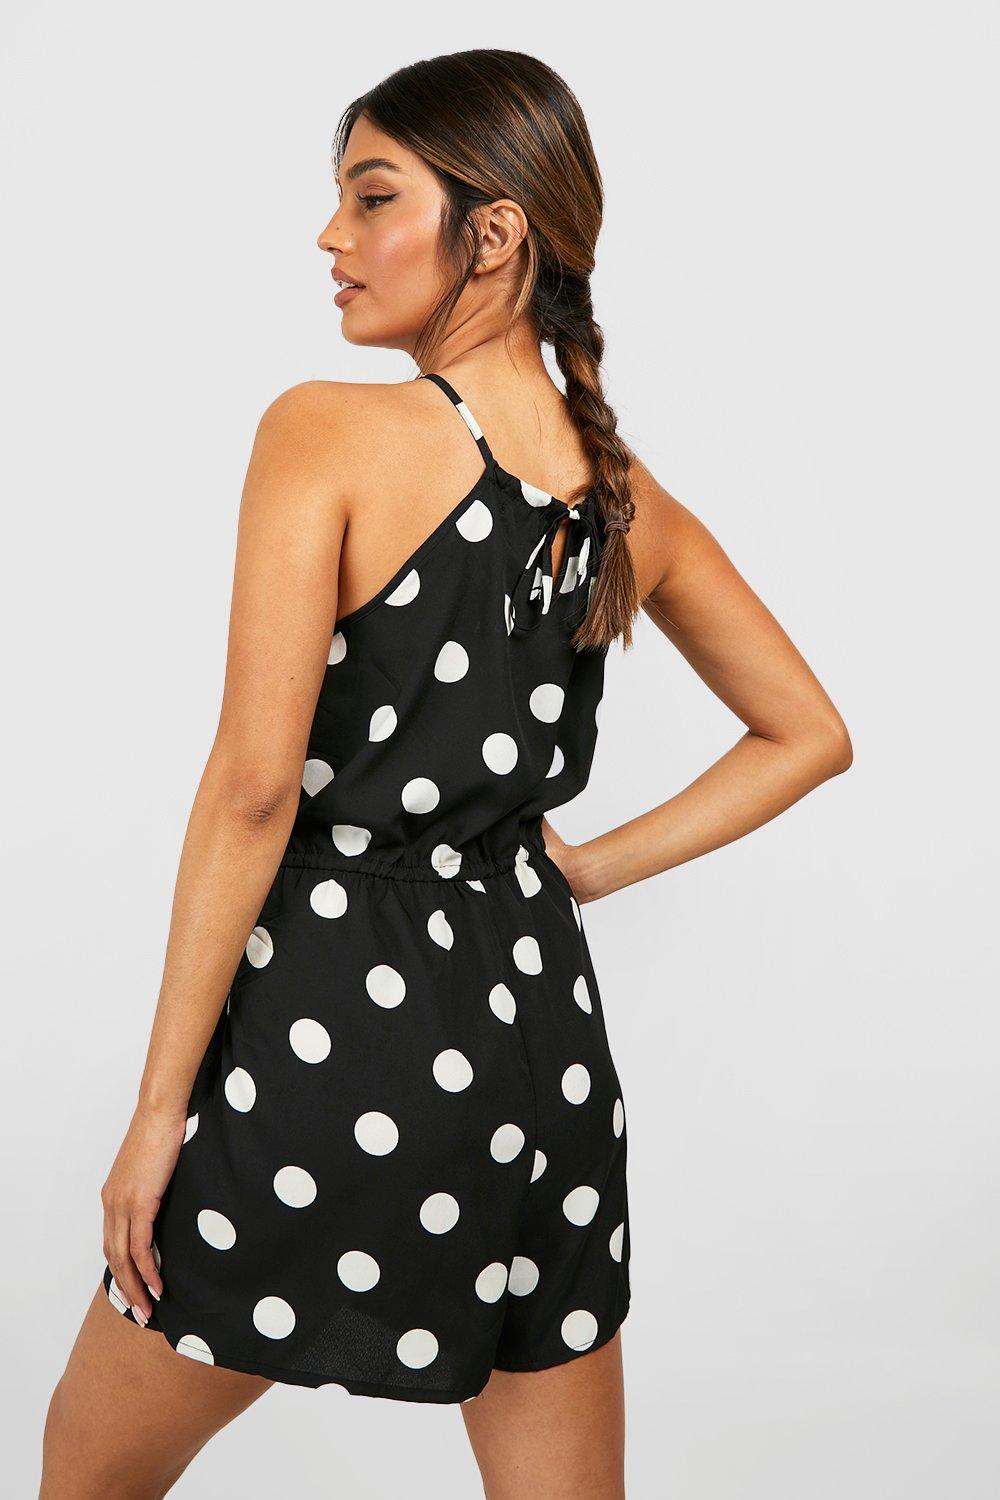 Boohoo Polka Dot Batwing Belted Romper in Black Womens Clothing Jumpsuits and rompers Playsuits 